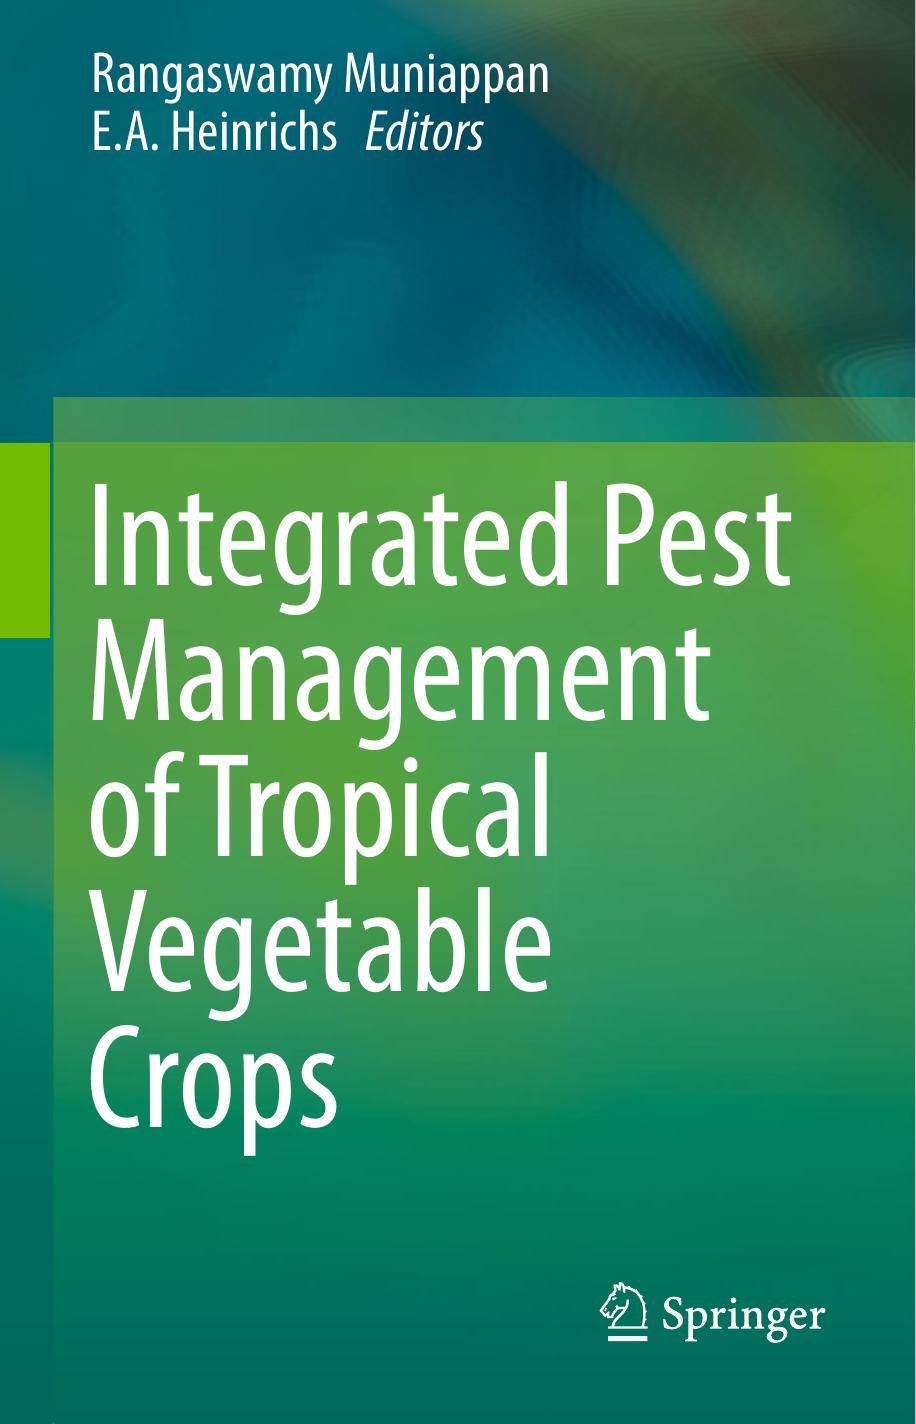 Integrated Pest Management of Tropical Vegetable Crops 2016